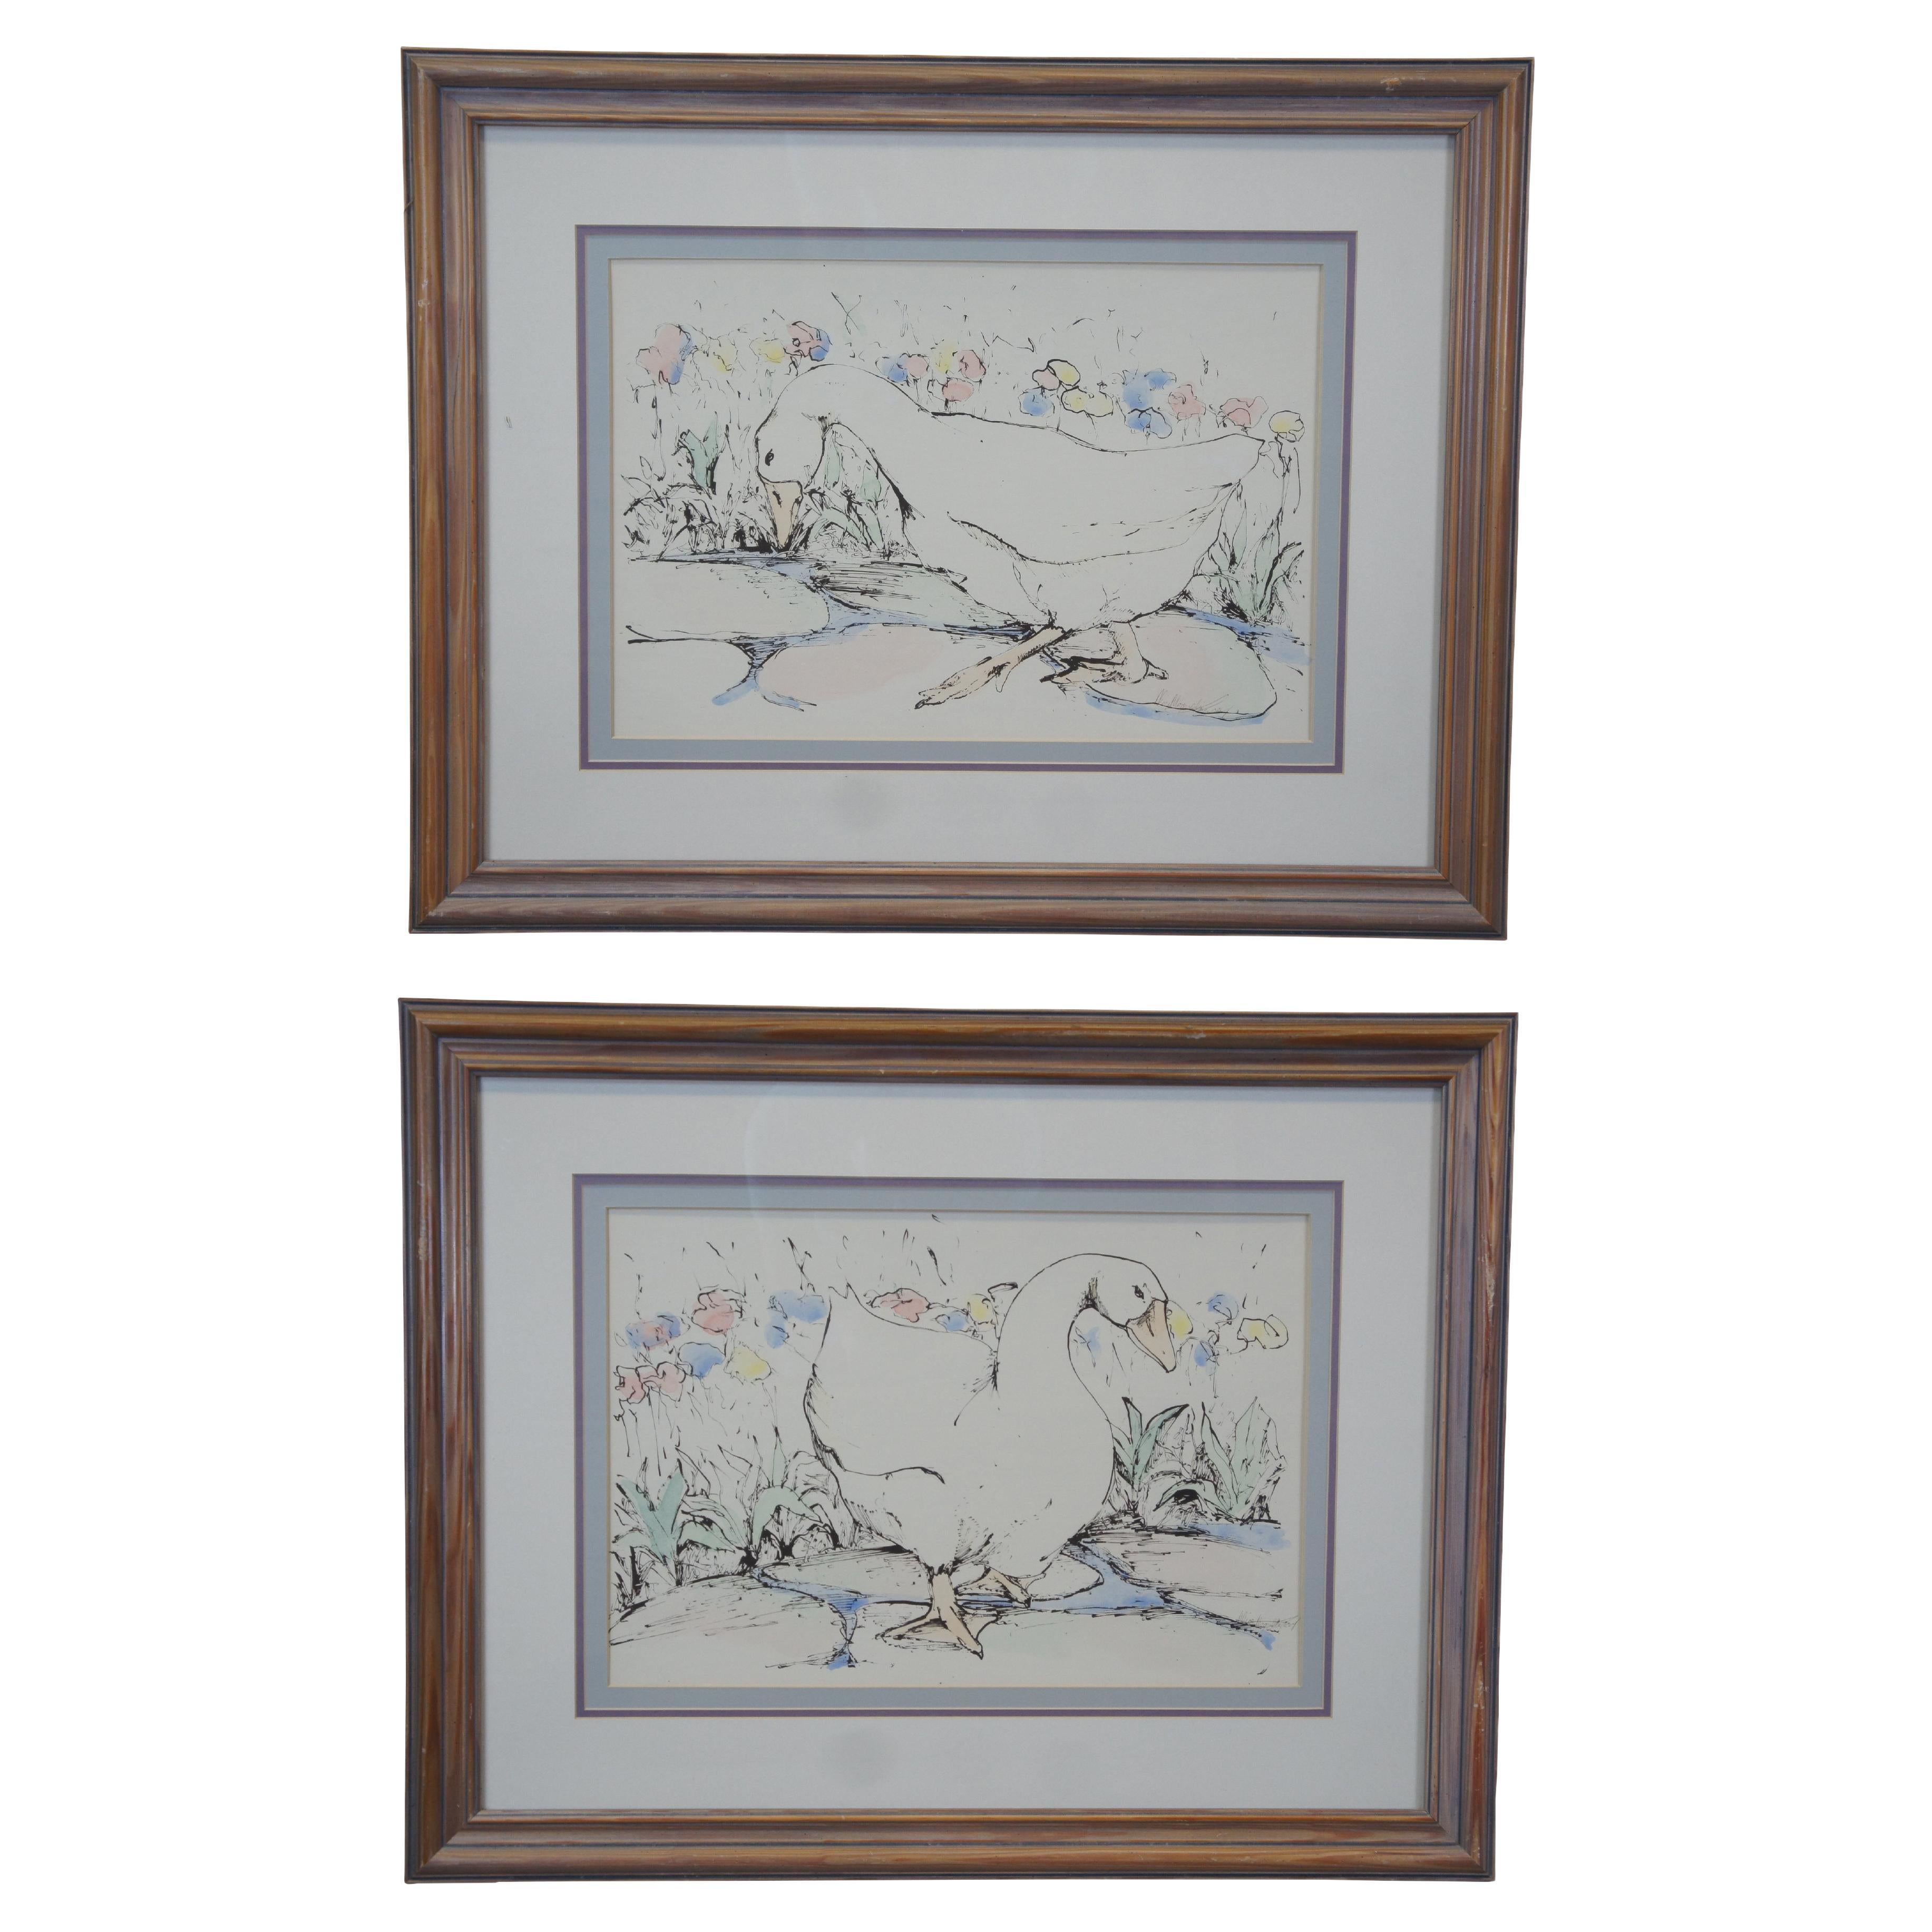 Pair of Alice Magnolia Lacey Goose Portrait Watercolor Paintings Duck Geese